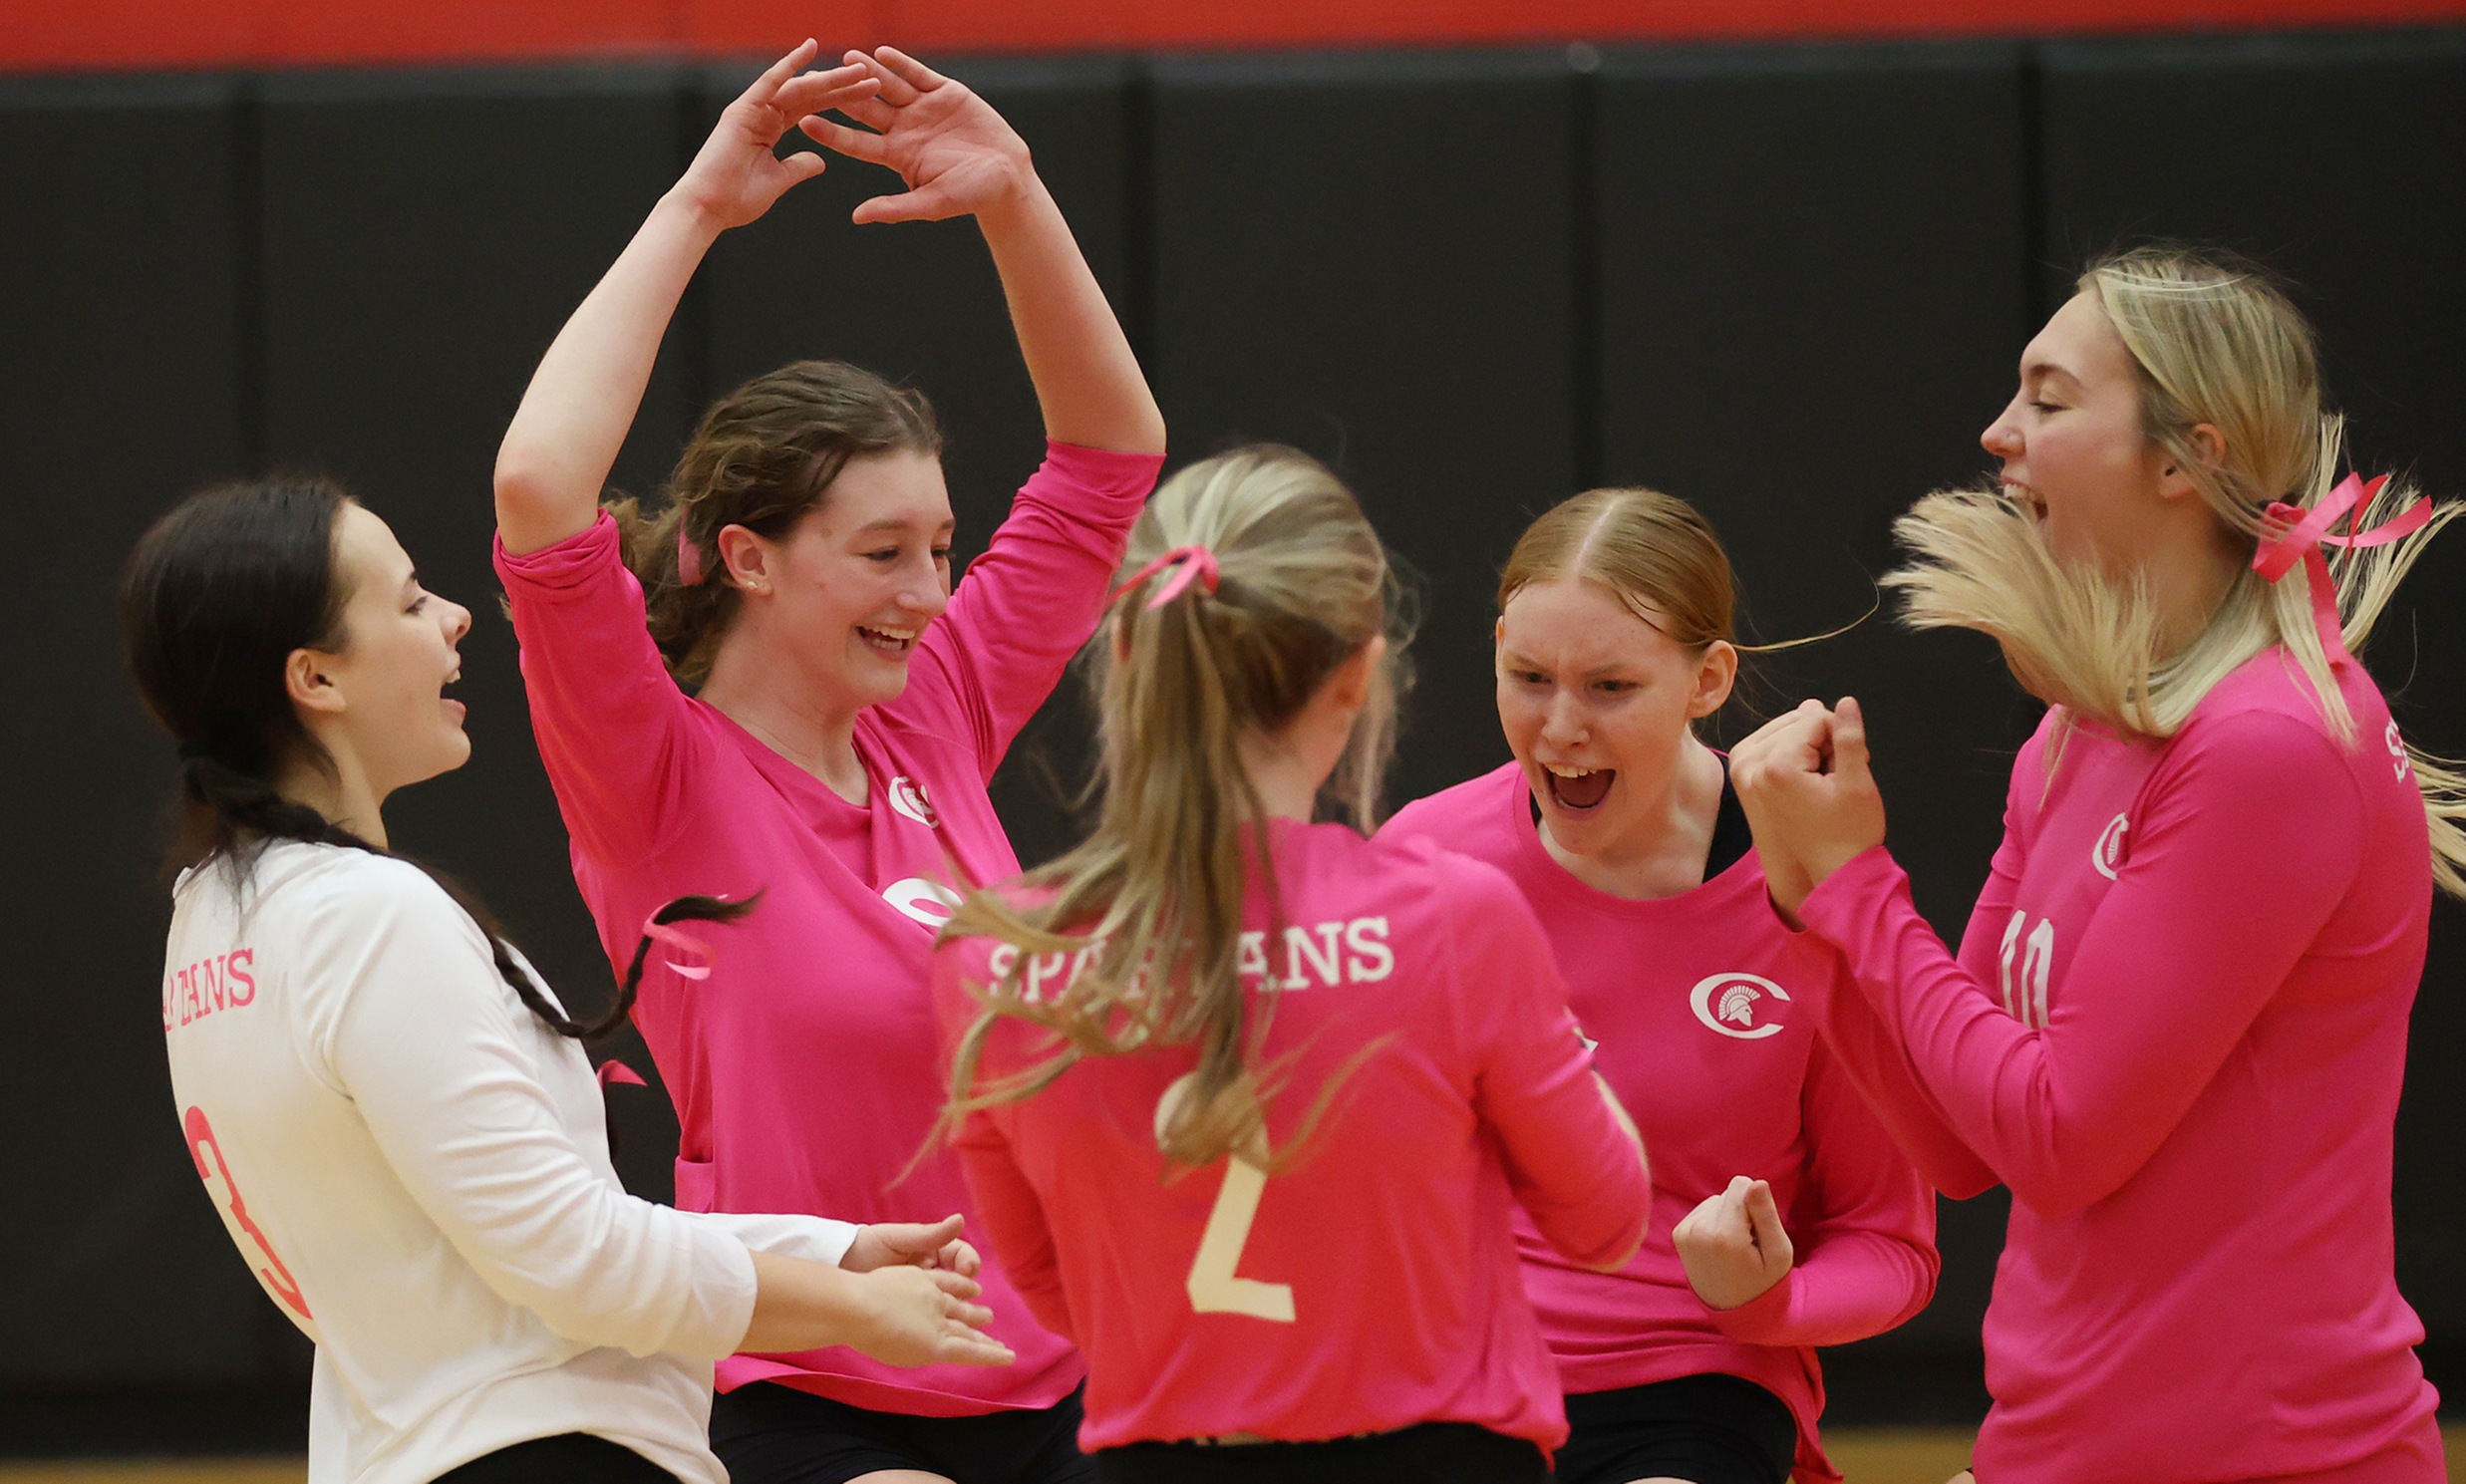 Spartans Capture Final Match of Season on &lsquo;Dig Pink&rsquo; Night